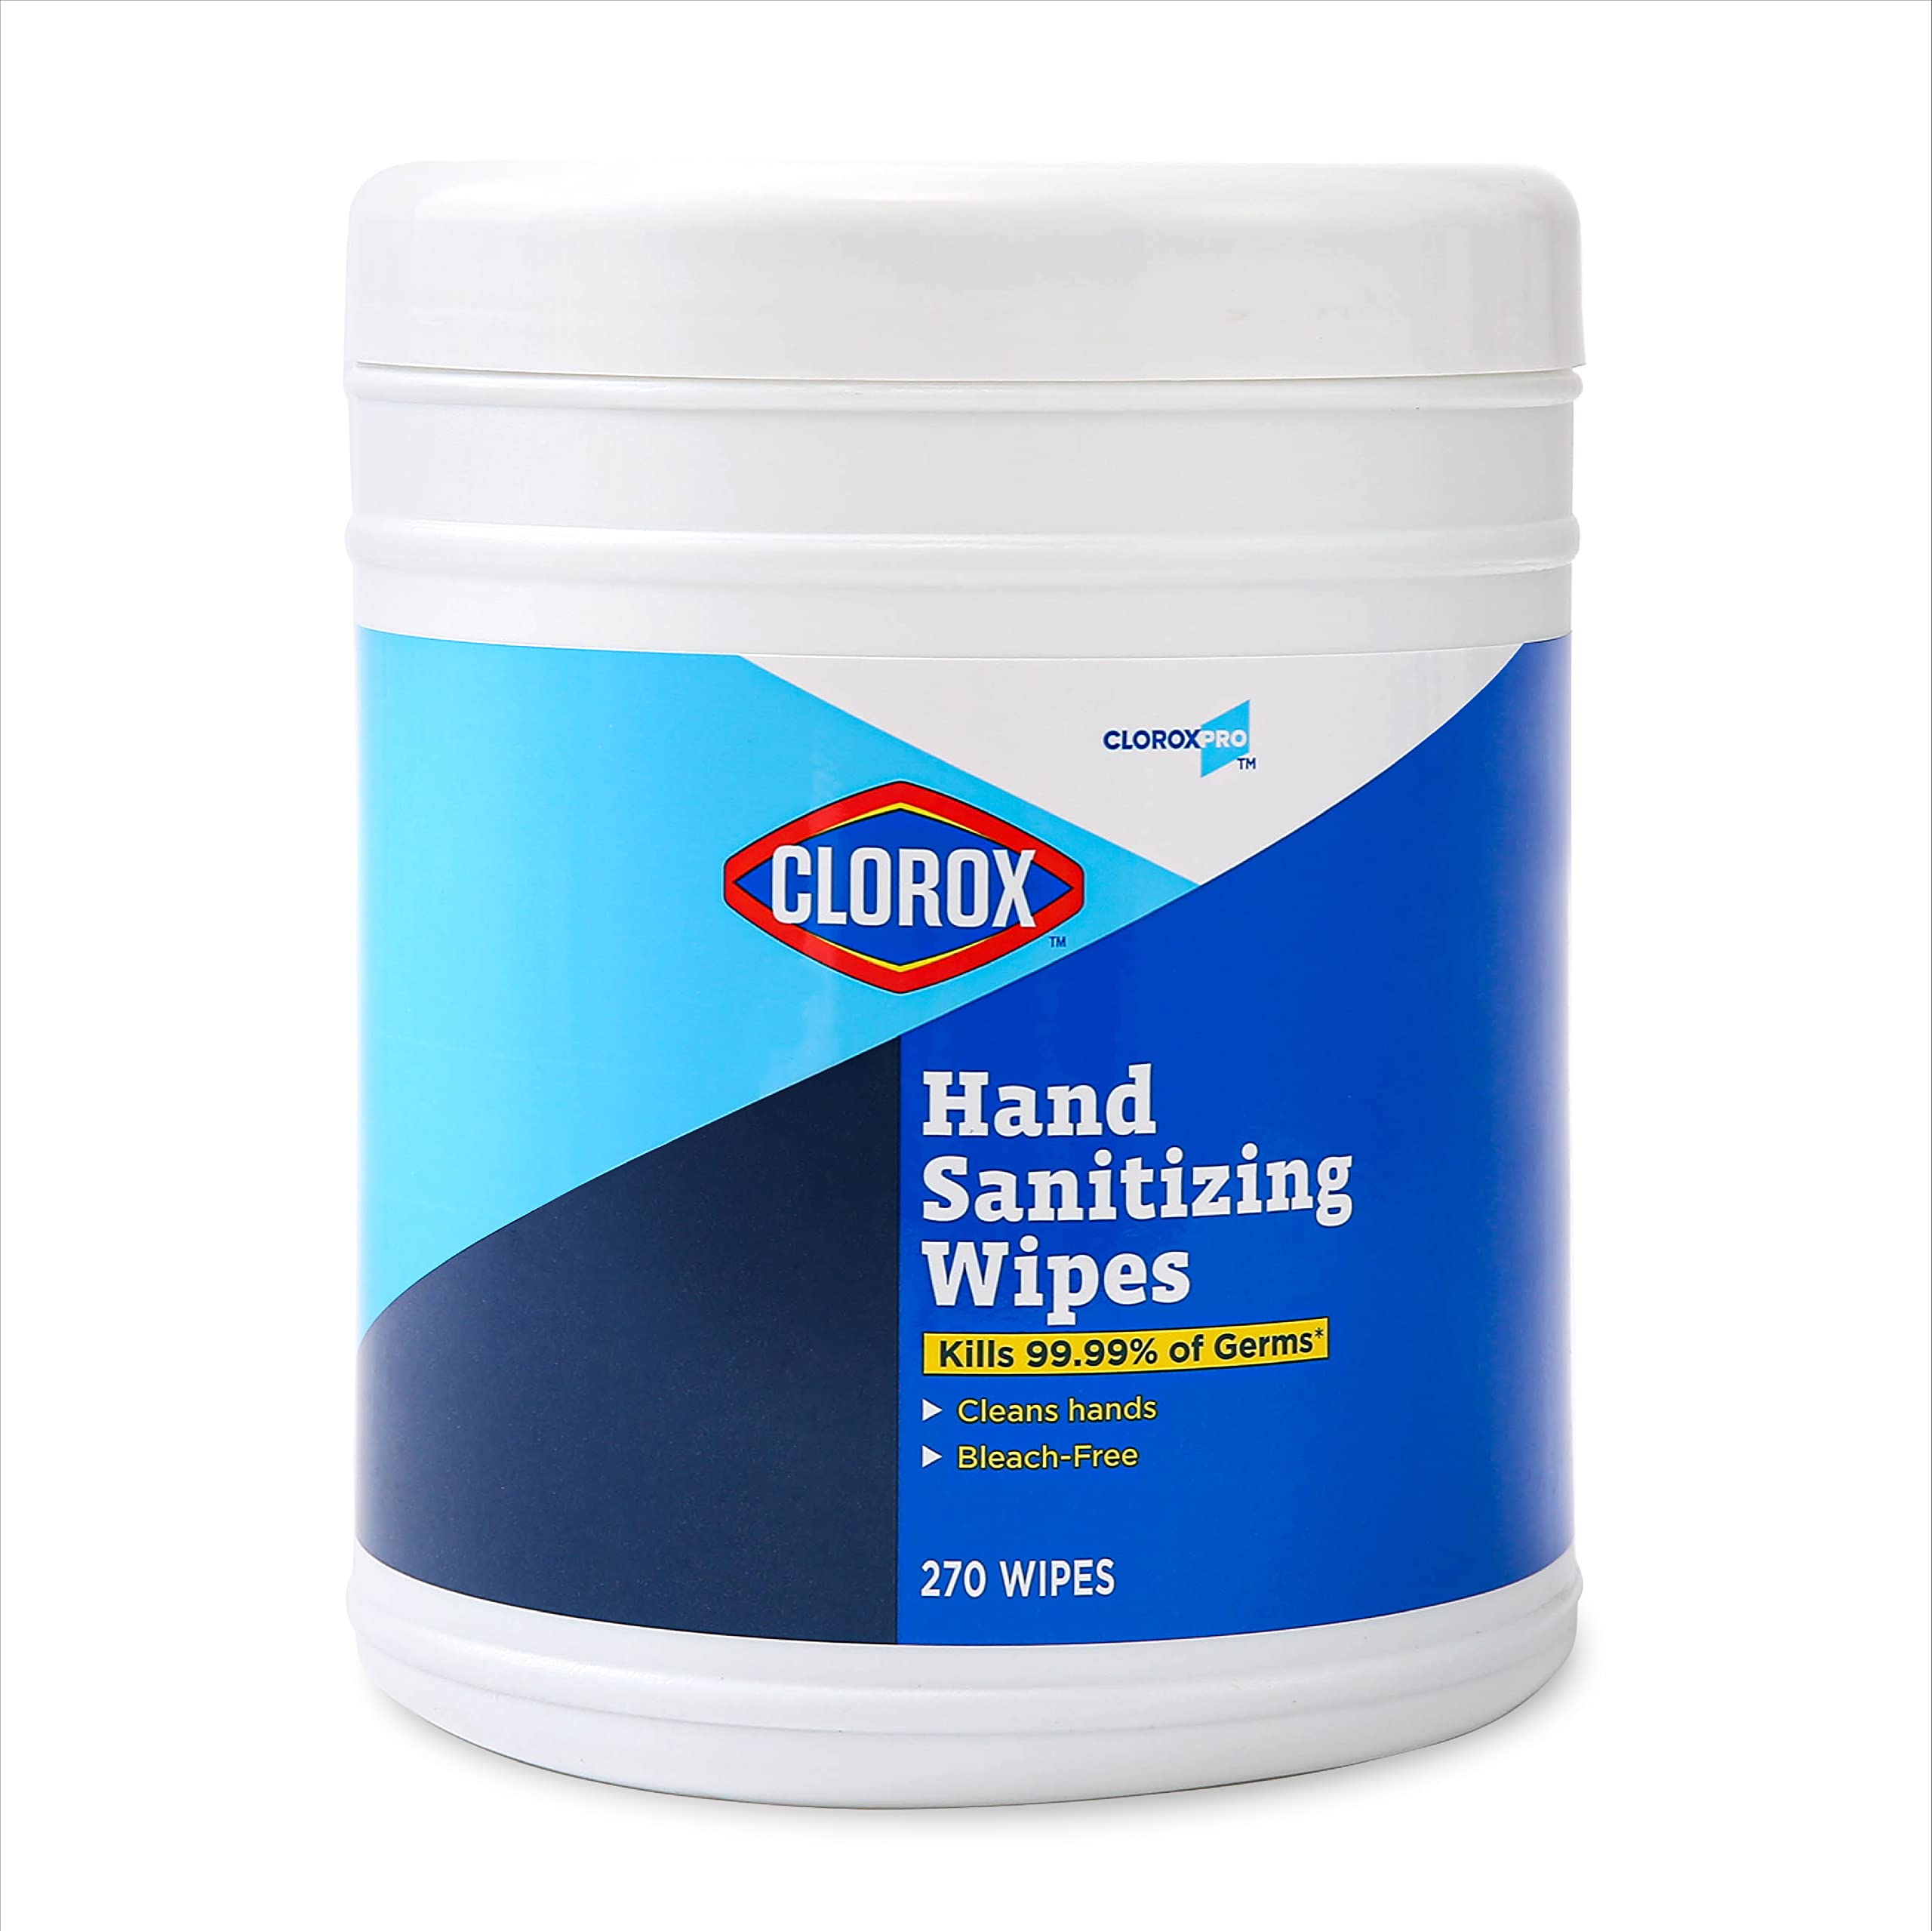 CloroxPro Disinfecting Wipes, Healthcare Cleaning Qatar